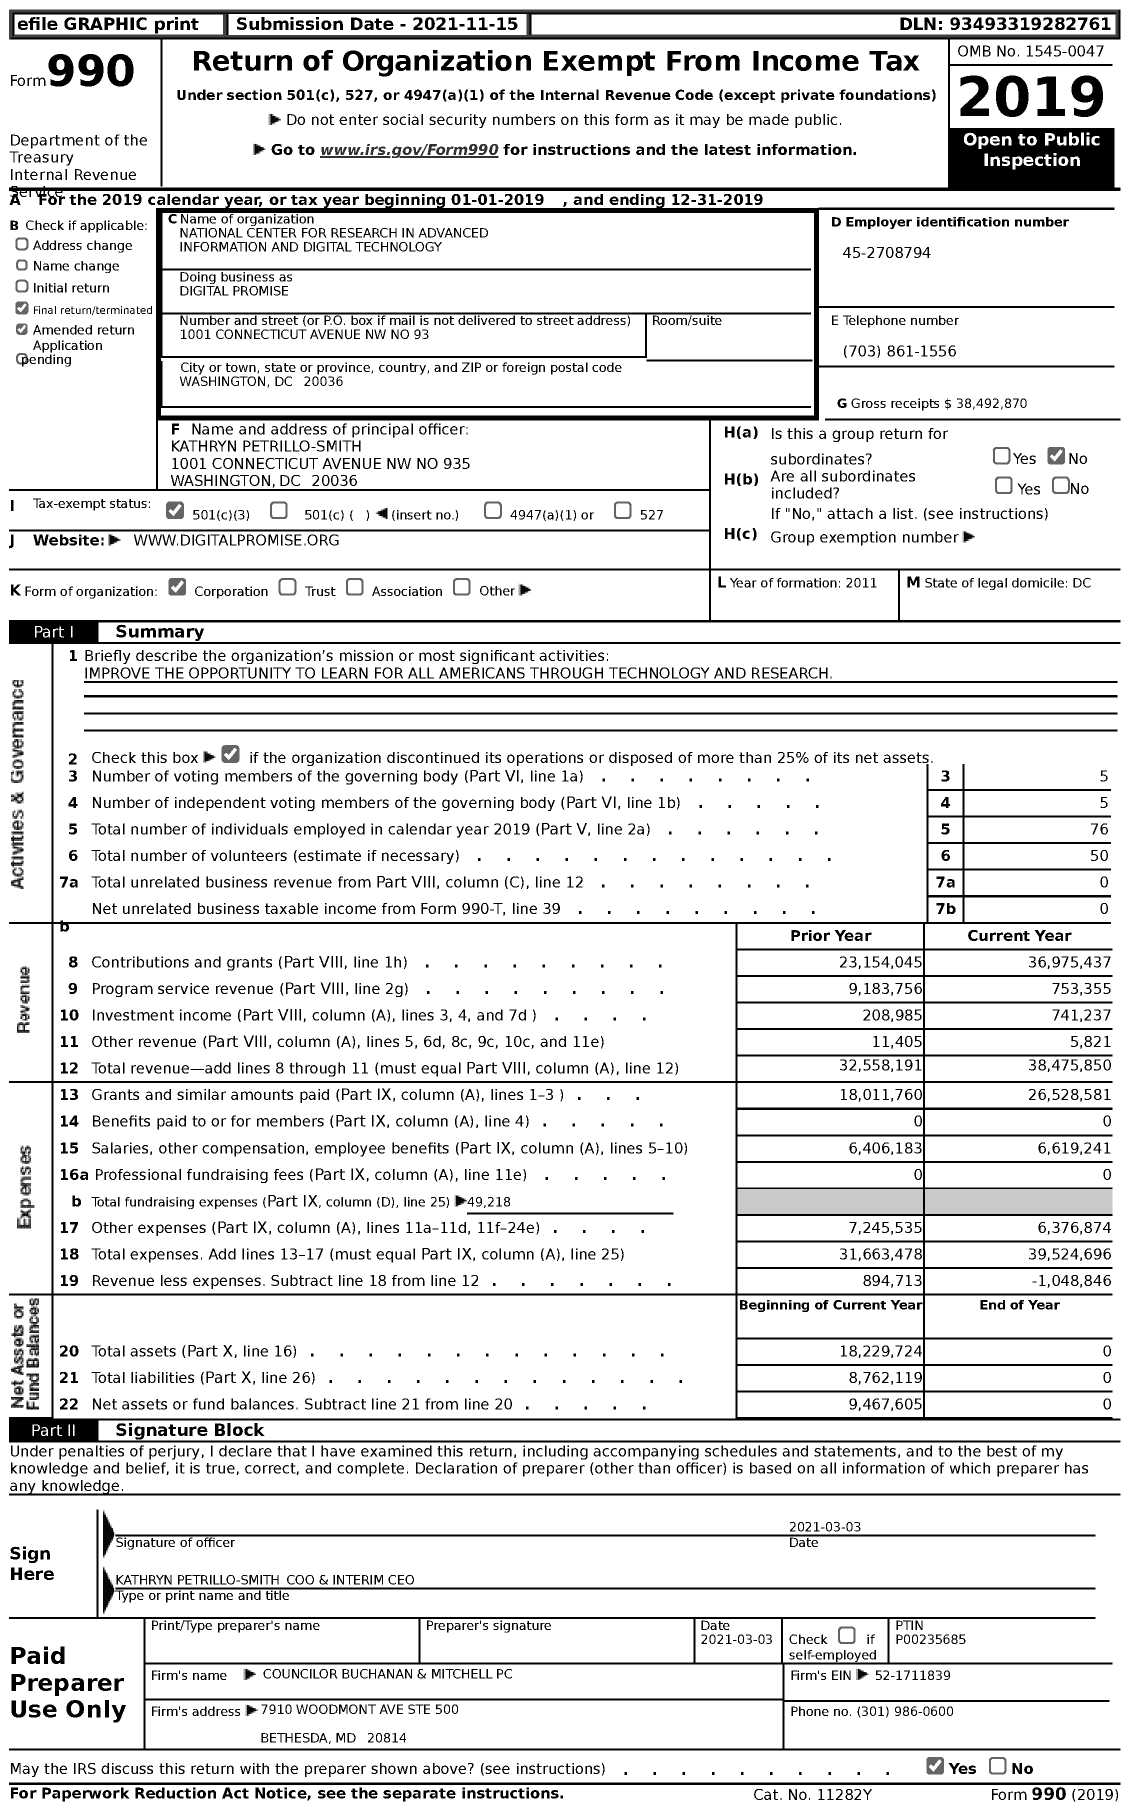 Image of first page of 2019 Form 990 for Digital Promise / National Center for Research in Advanced Information and Digital Technology